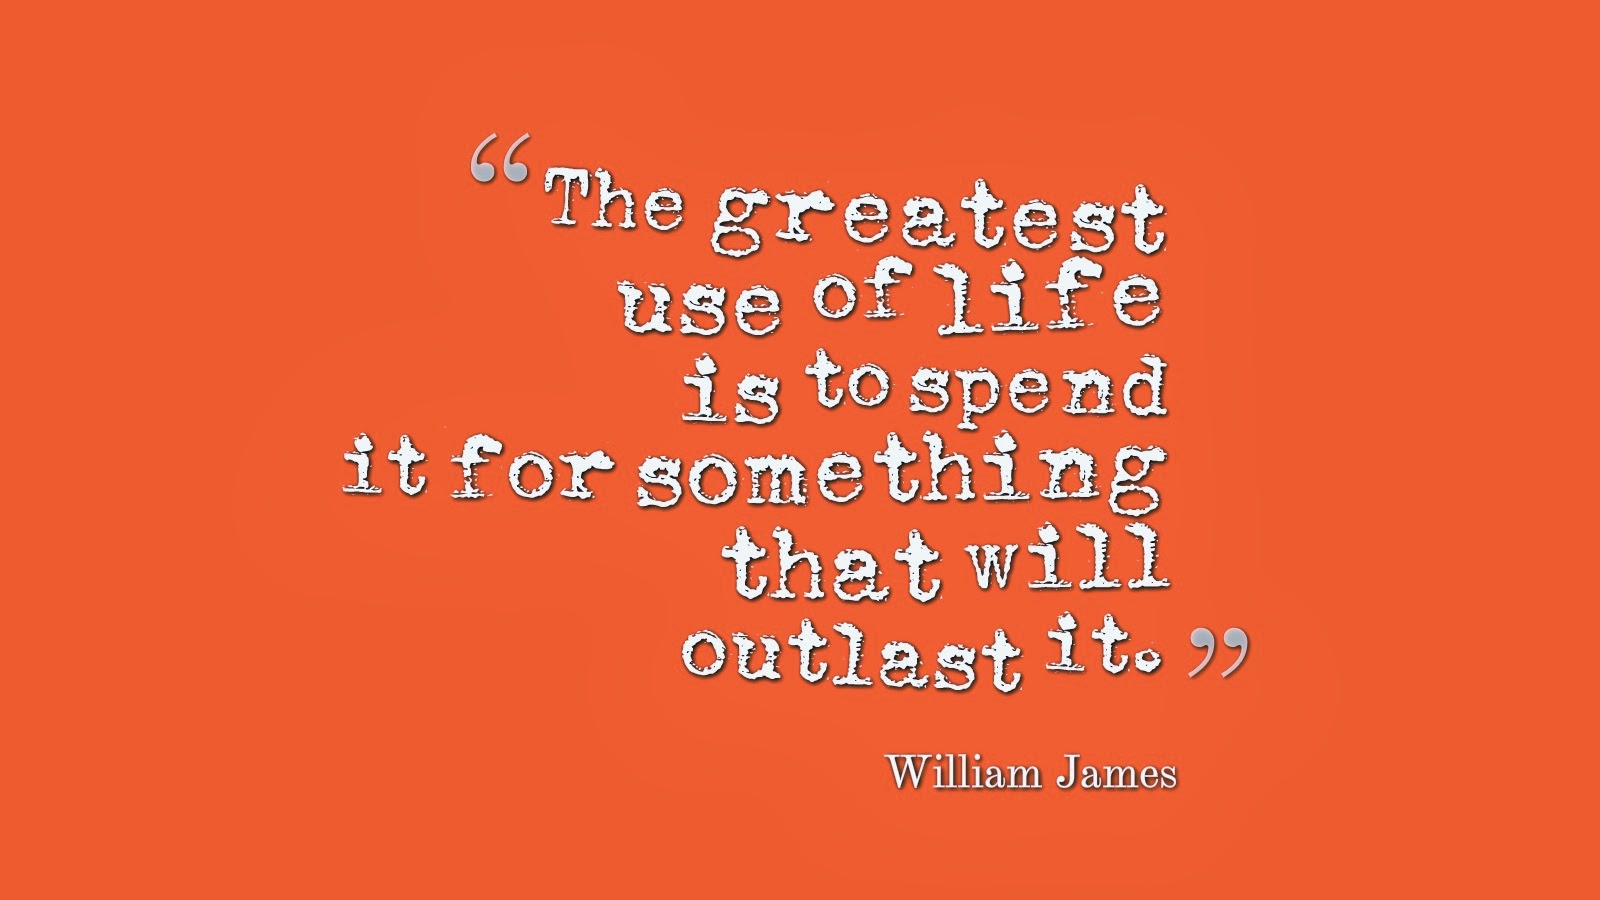 To spend something. The great use of Life is to spend it for something that will Outlast it William James. The great use of Life is to spend it for something that will Outlast it.